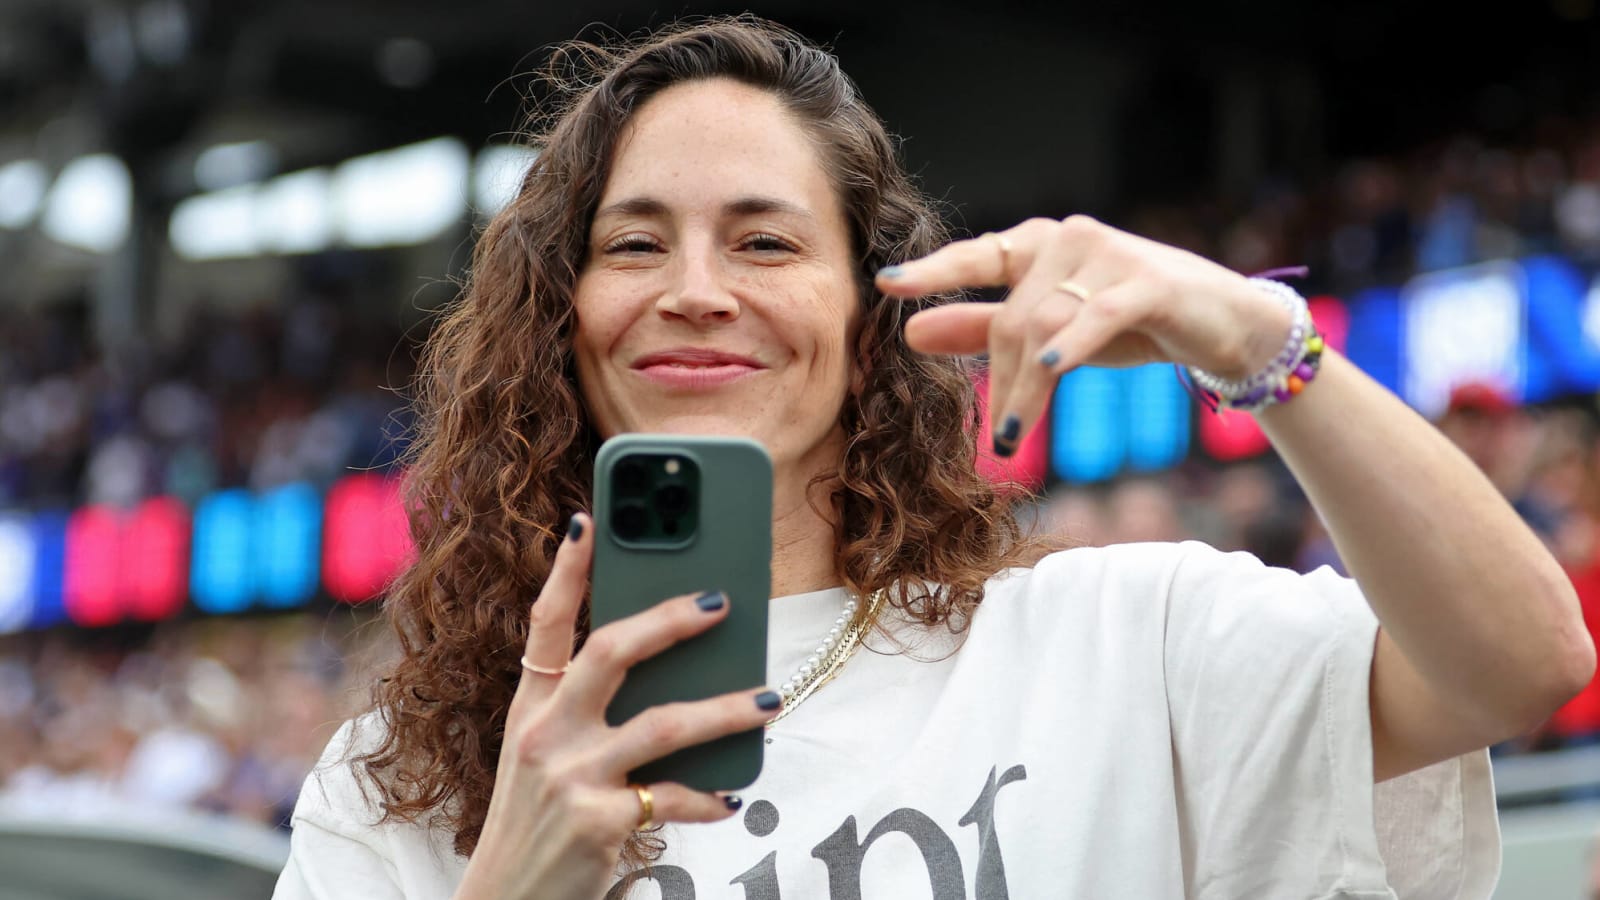 WNBA Legend Sue Bird on the NCAAW Final Four and More